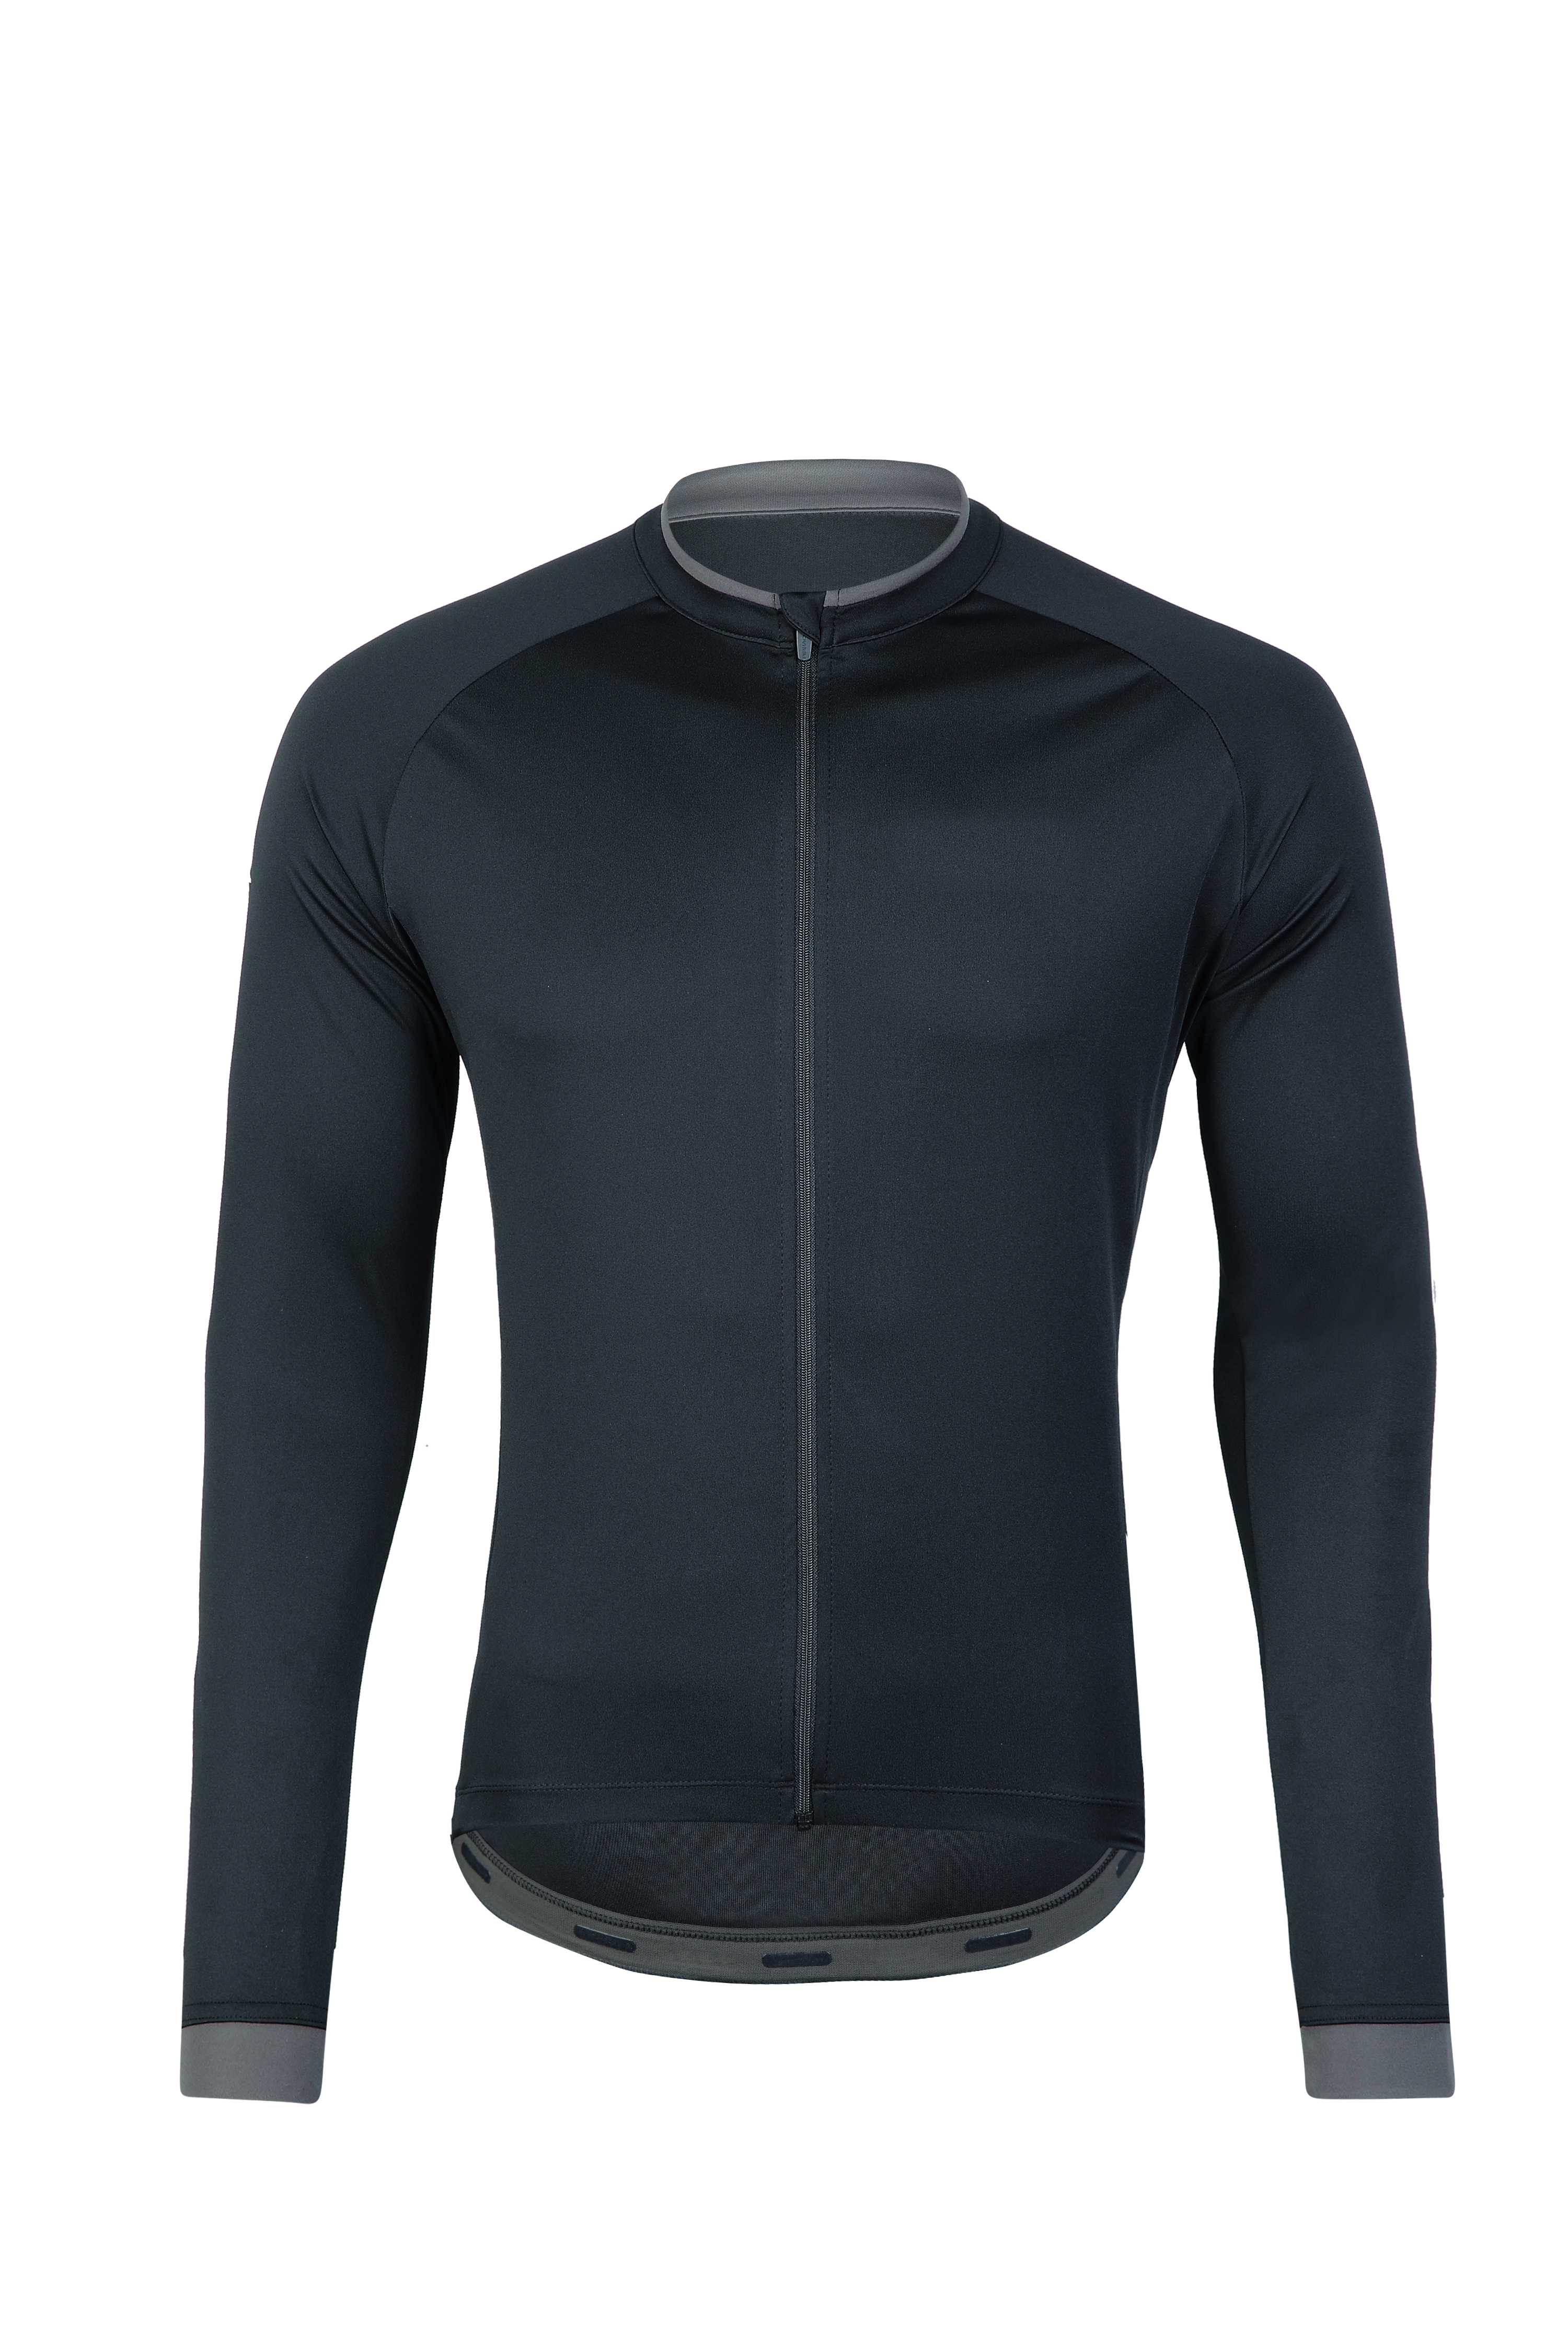 Men’s knitted cycling L/S Jersey.